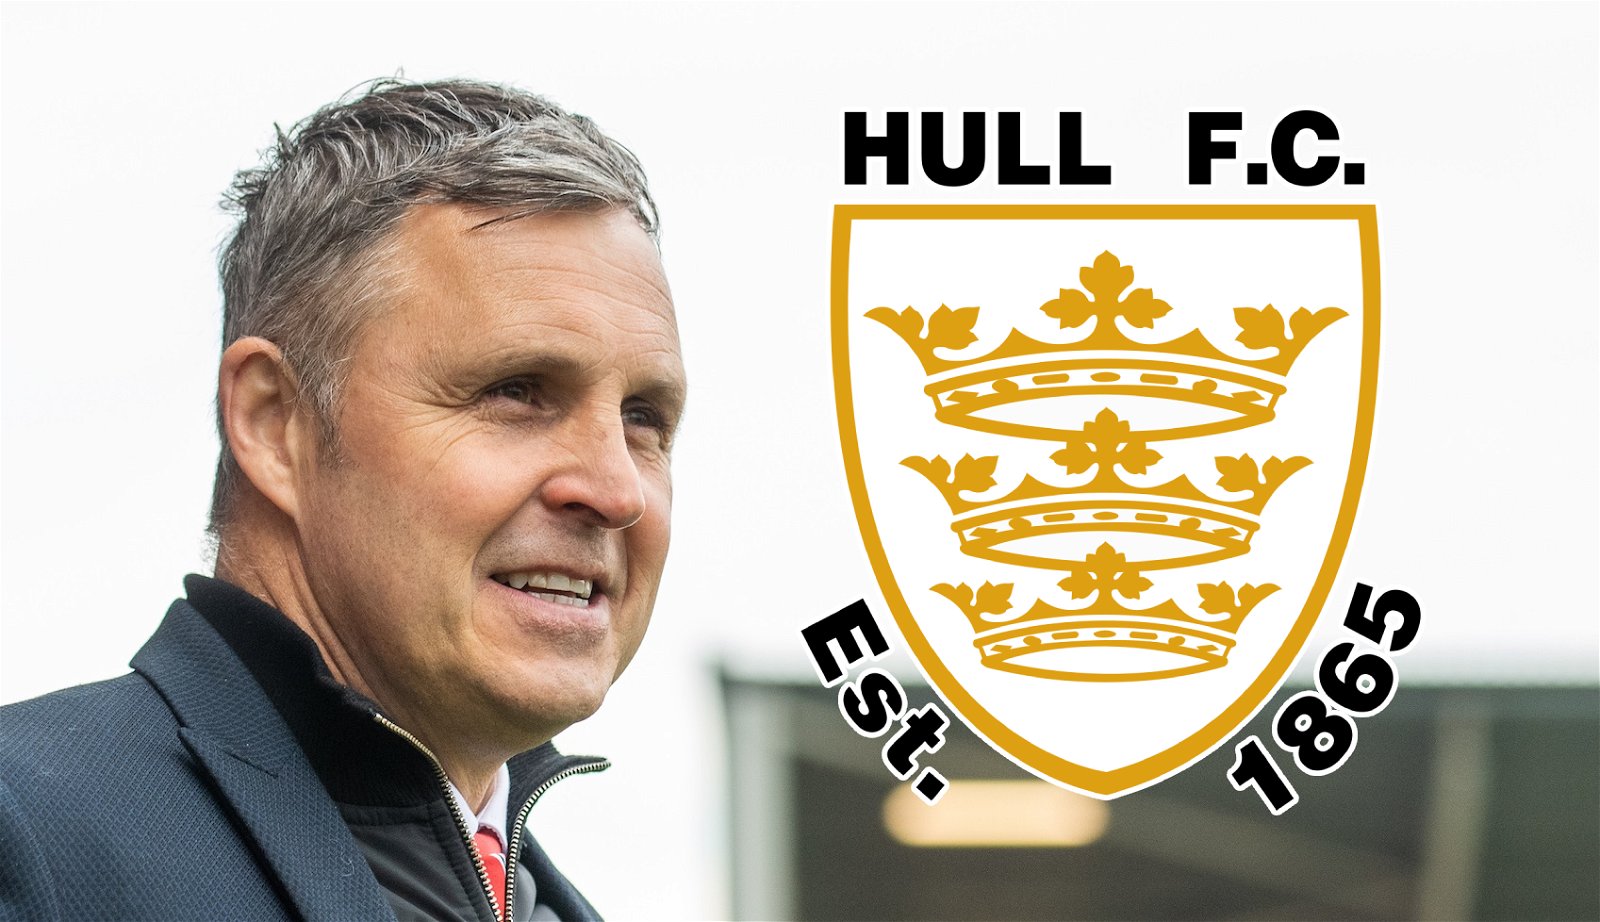 Paul Rowley linked with Hull FC